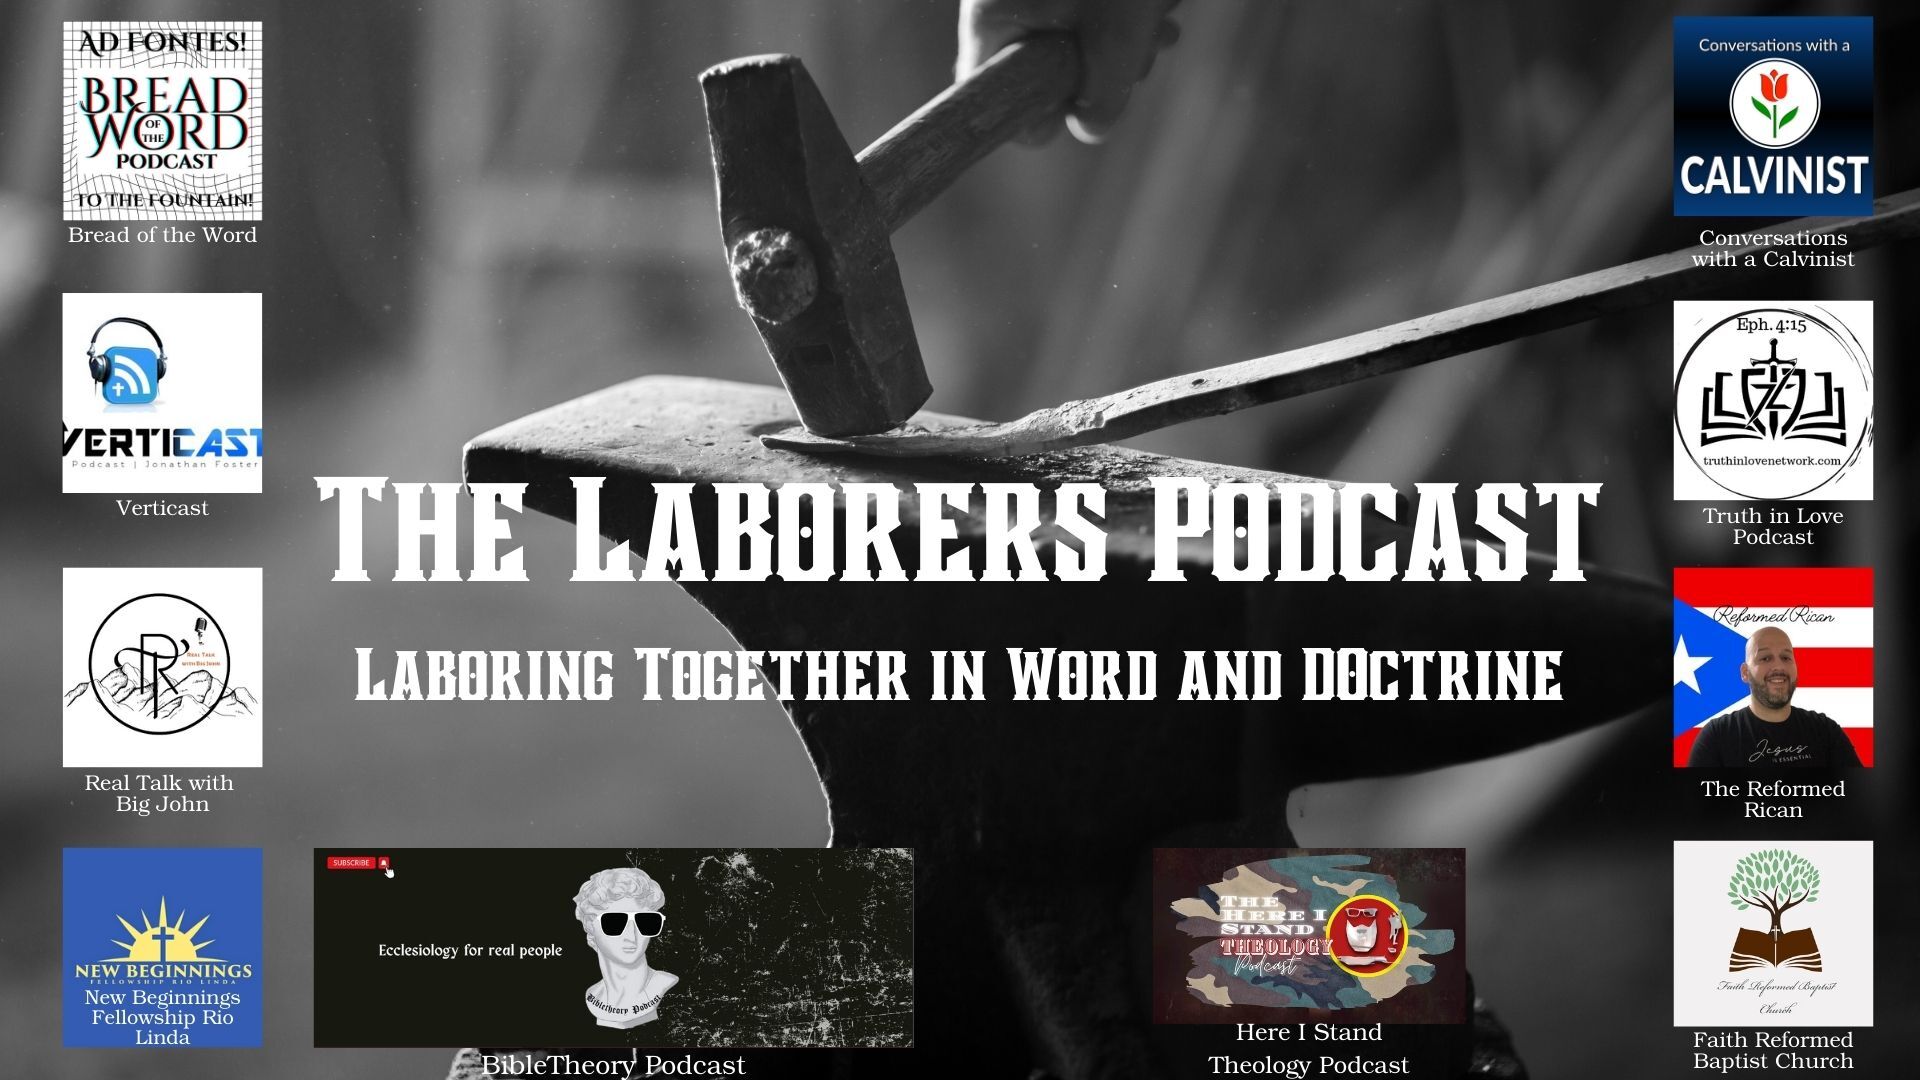 The_Laborers_Podcast6mhxn.jpg